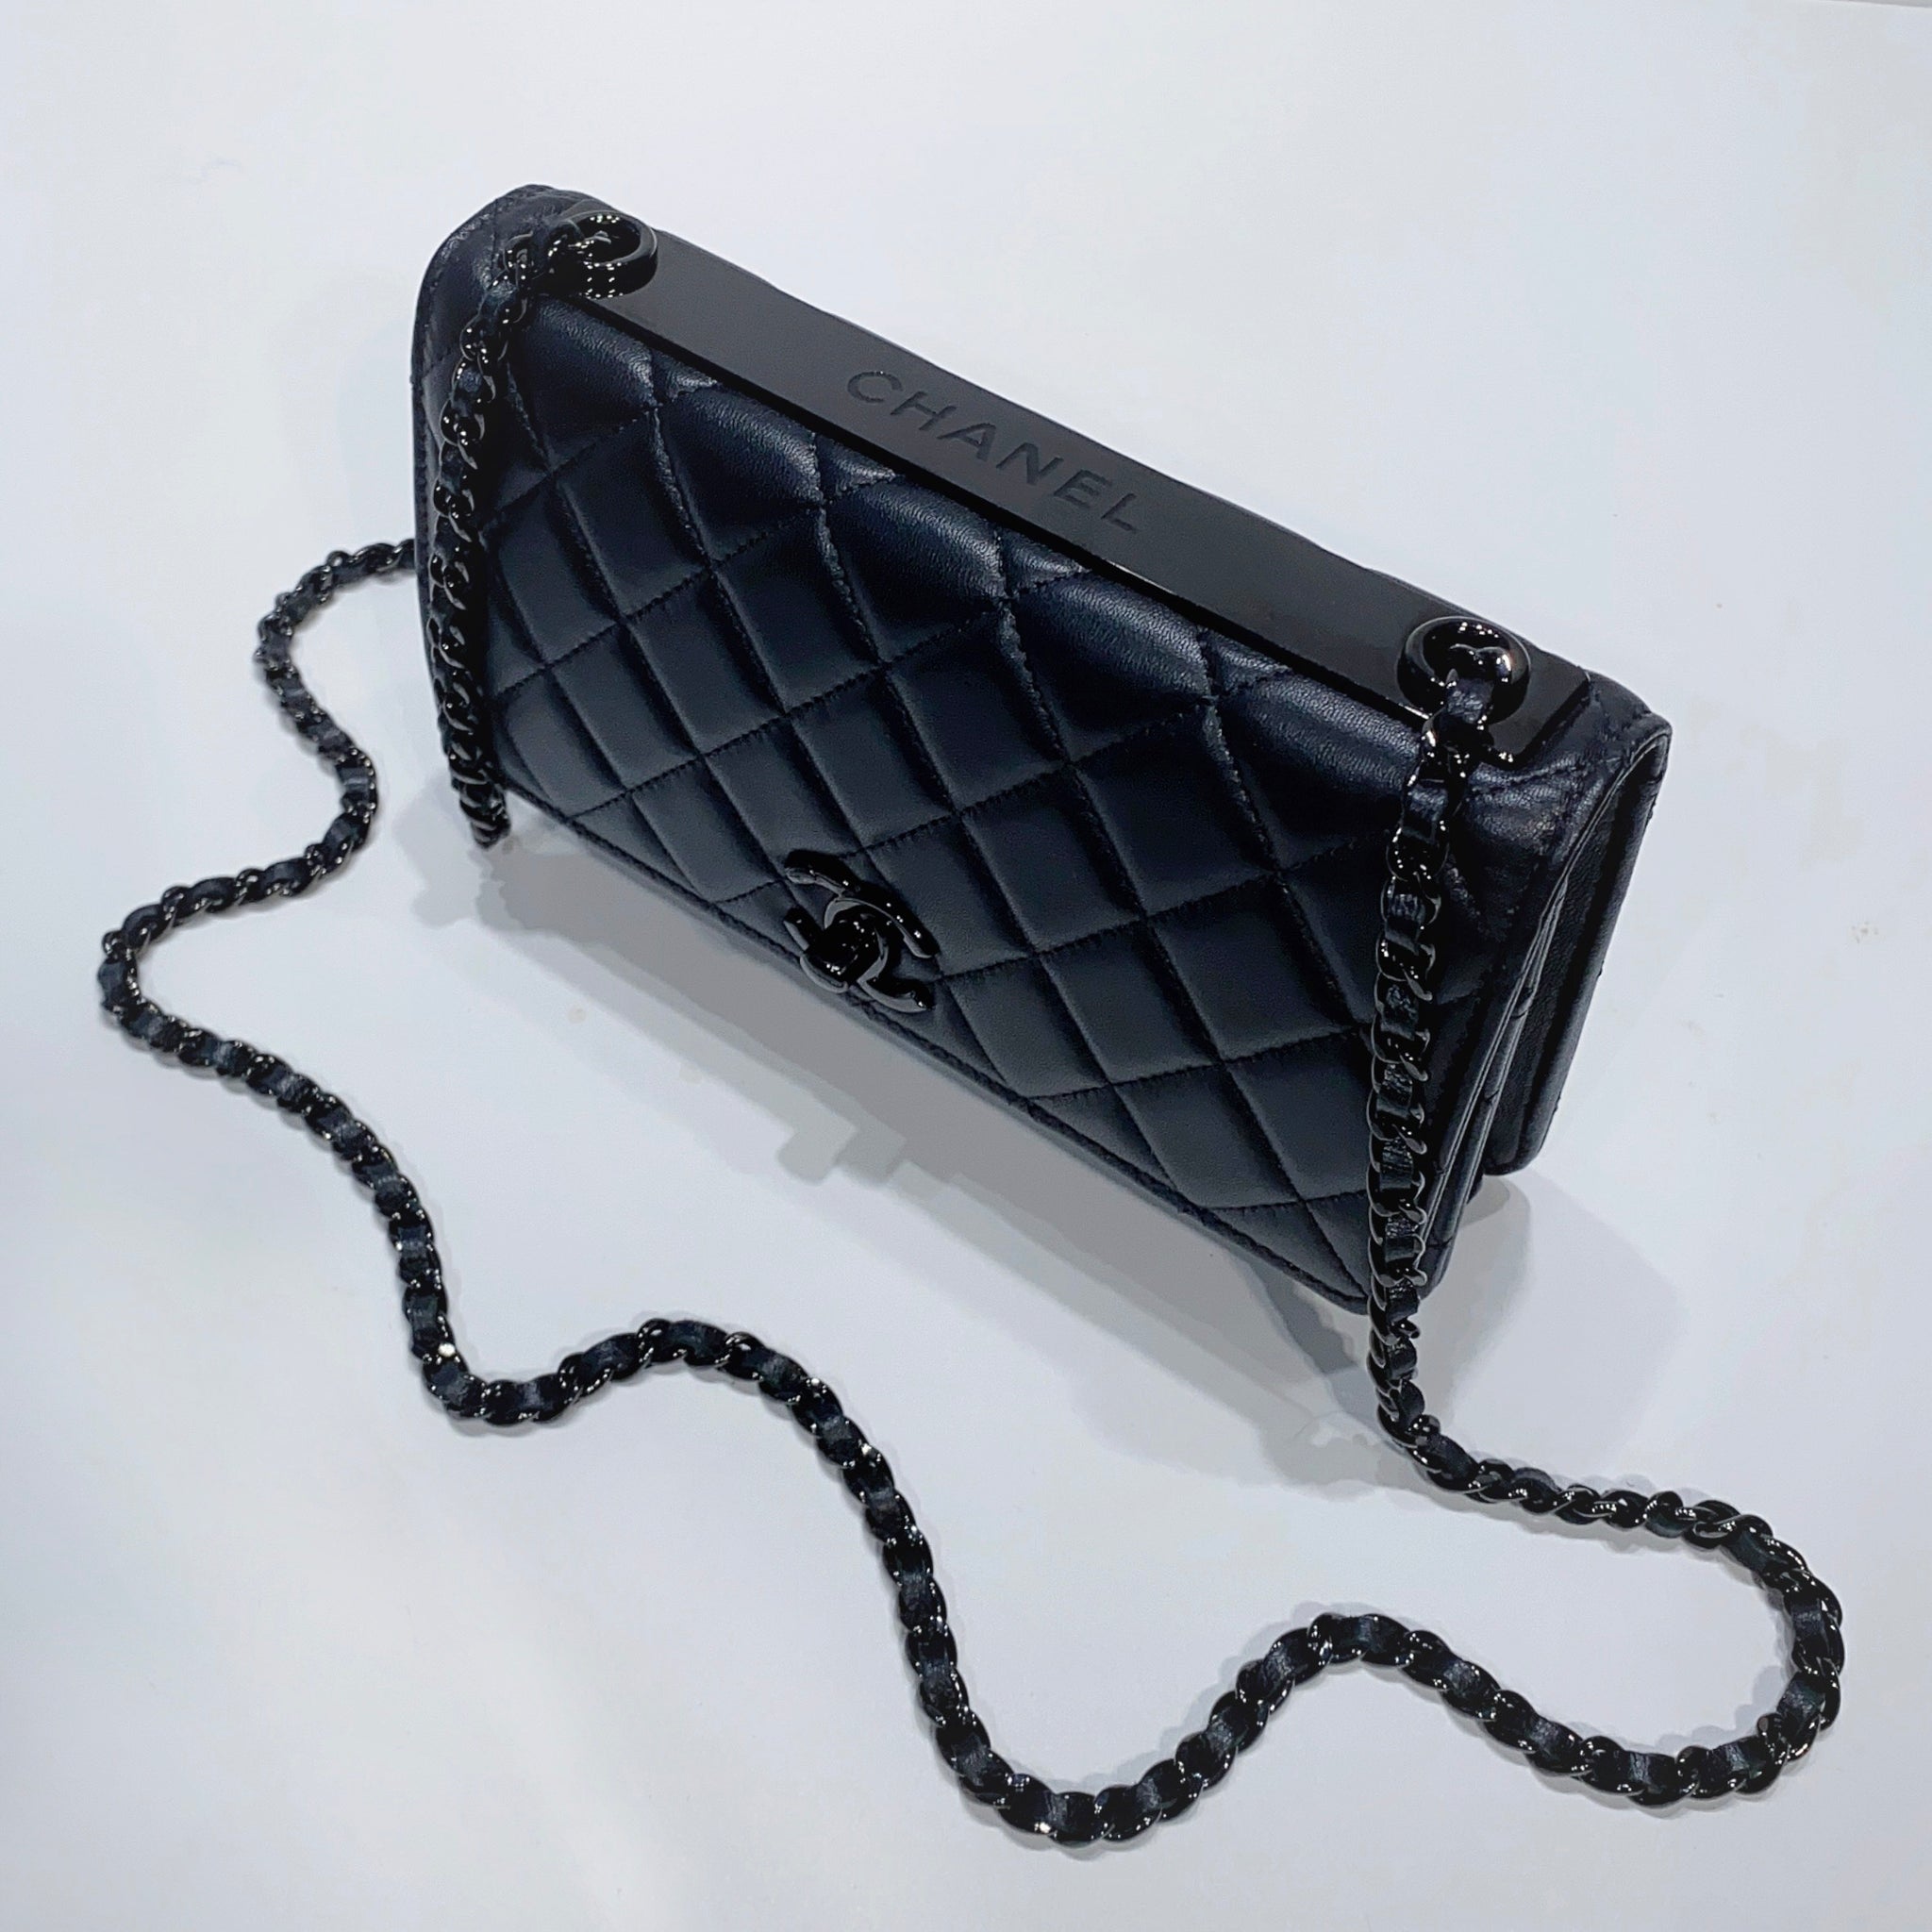 All About the Chanel Wallet On Chain Bag